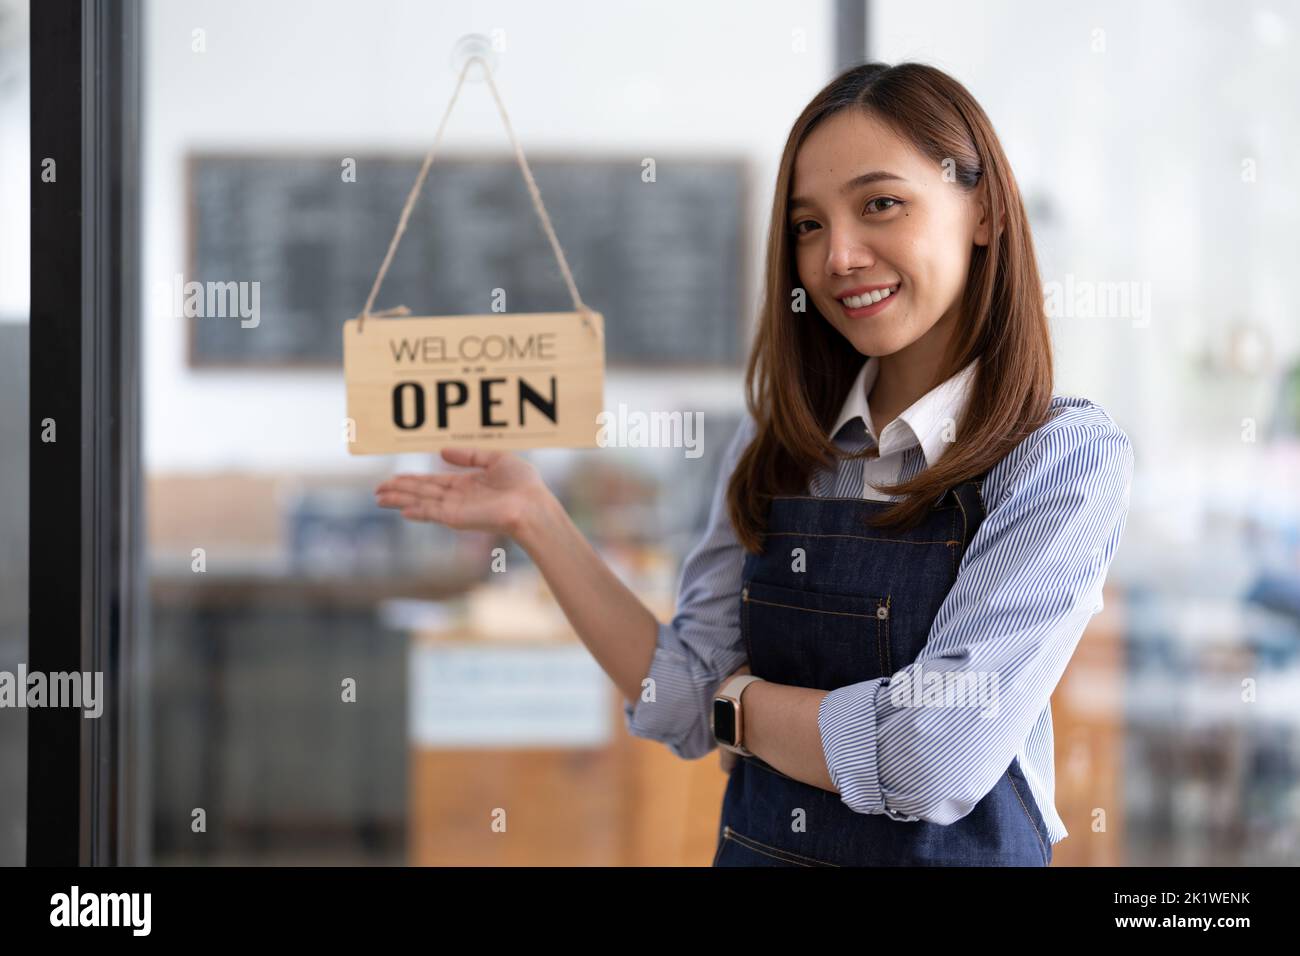 Welcome open shop barista waitress open sign on glass door modern coffee shop ready to serve restaurant cafe retail small business owners. Stock Photo